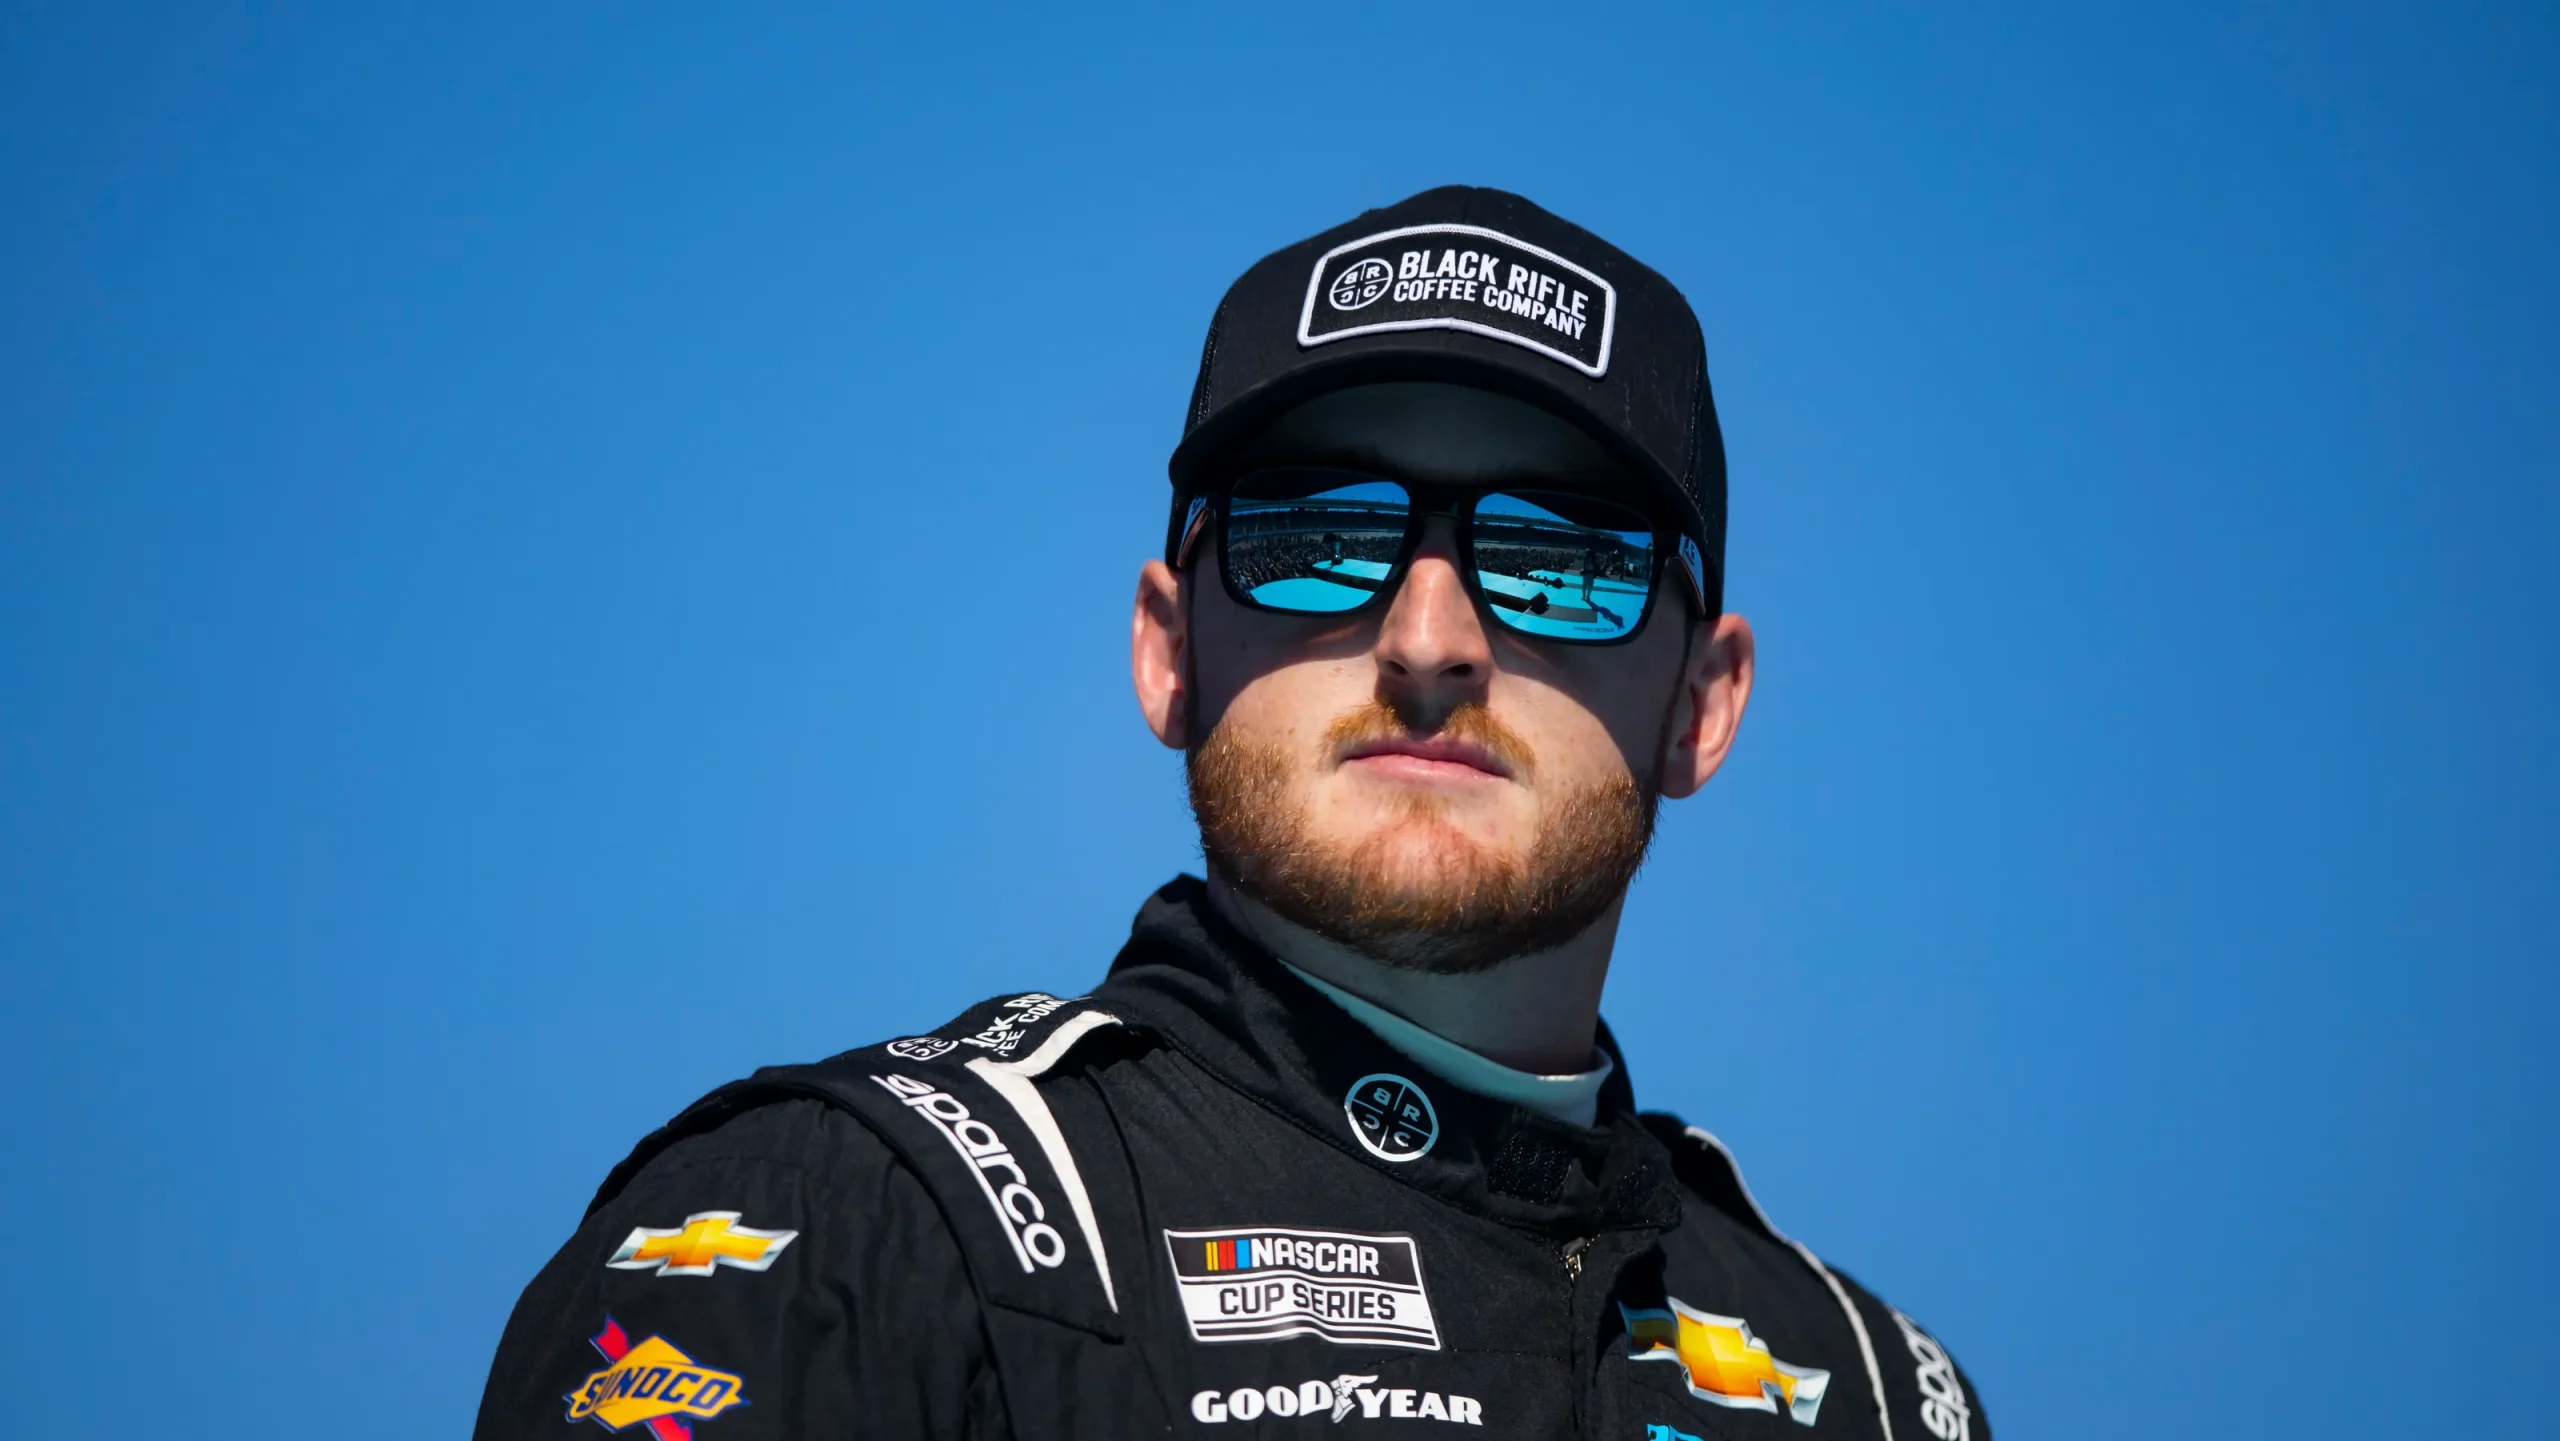 Amerivet Team Enters NASCAR's Coca-Cola 600 with Ty Dillon at the Helm